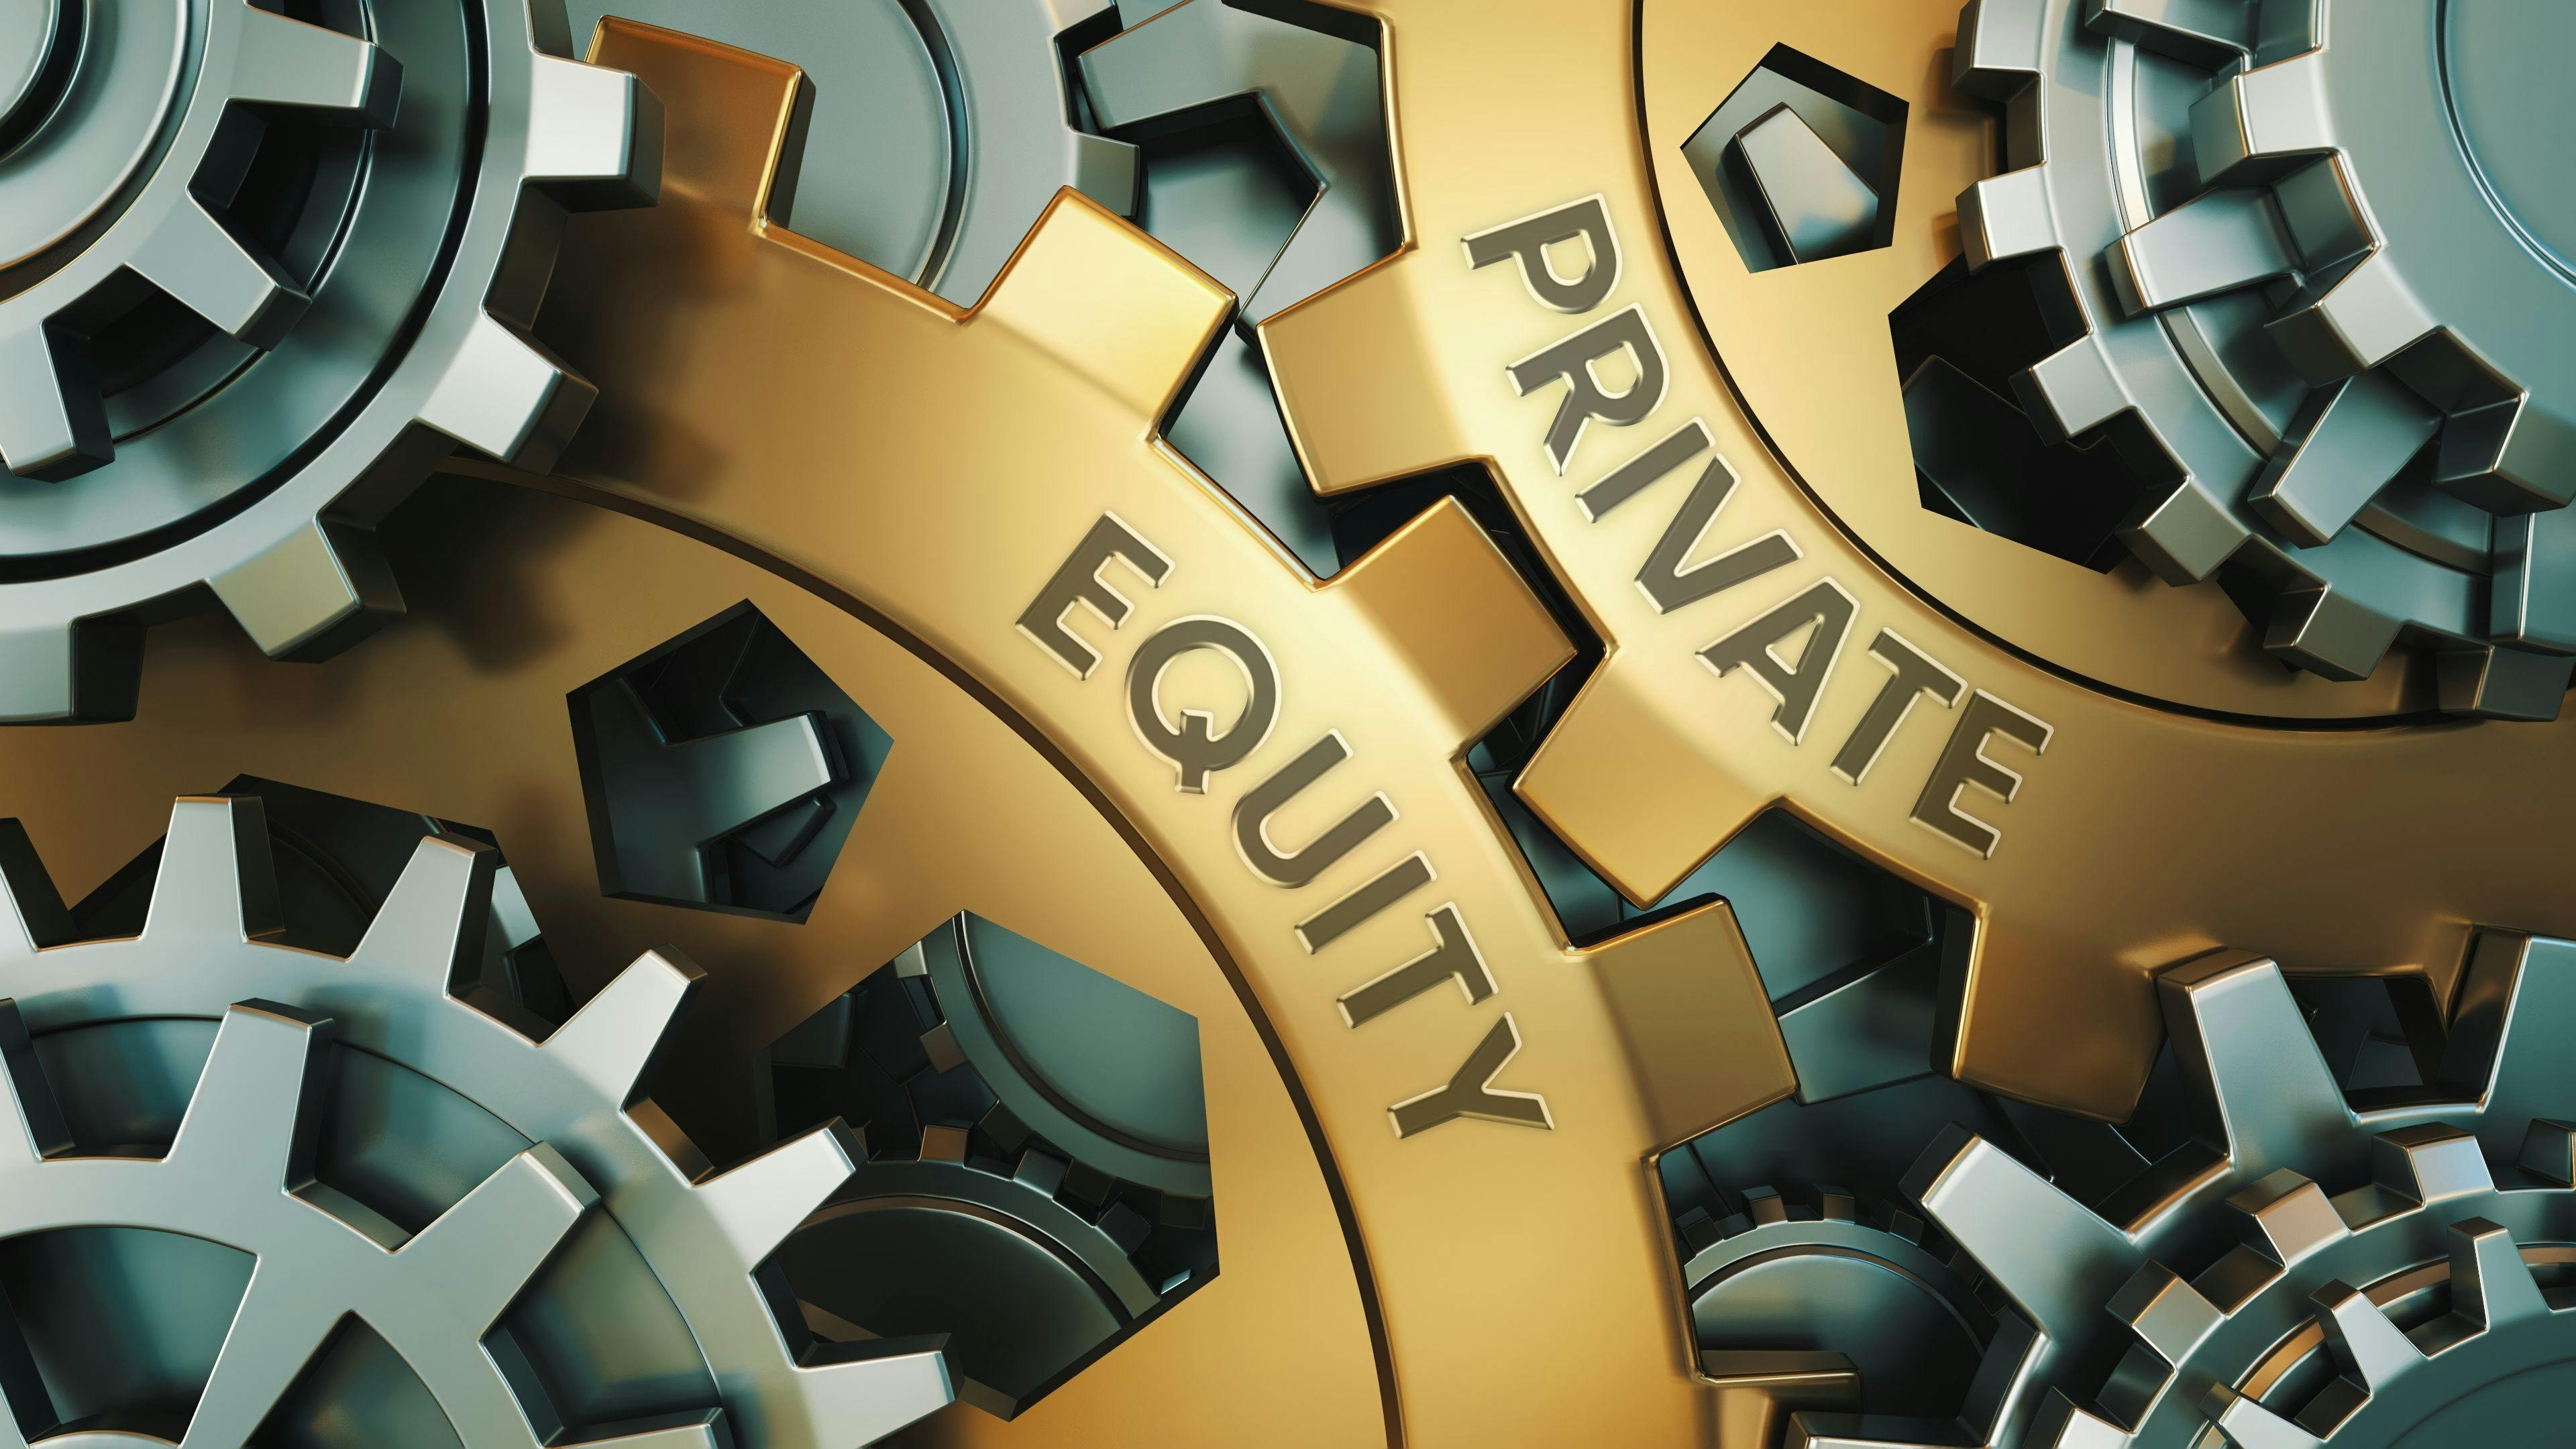 Private equity growth threatens quality, costs of health care